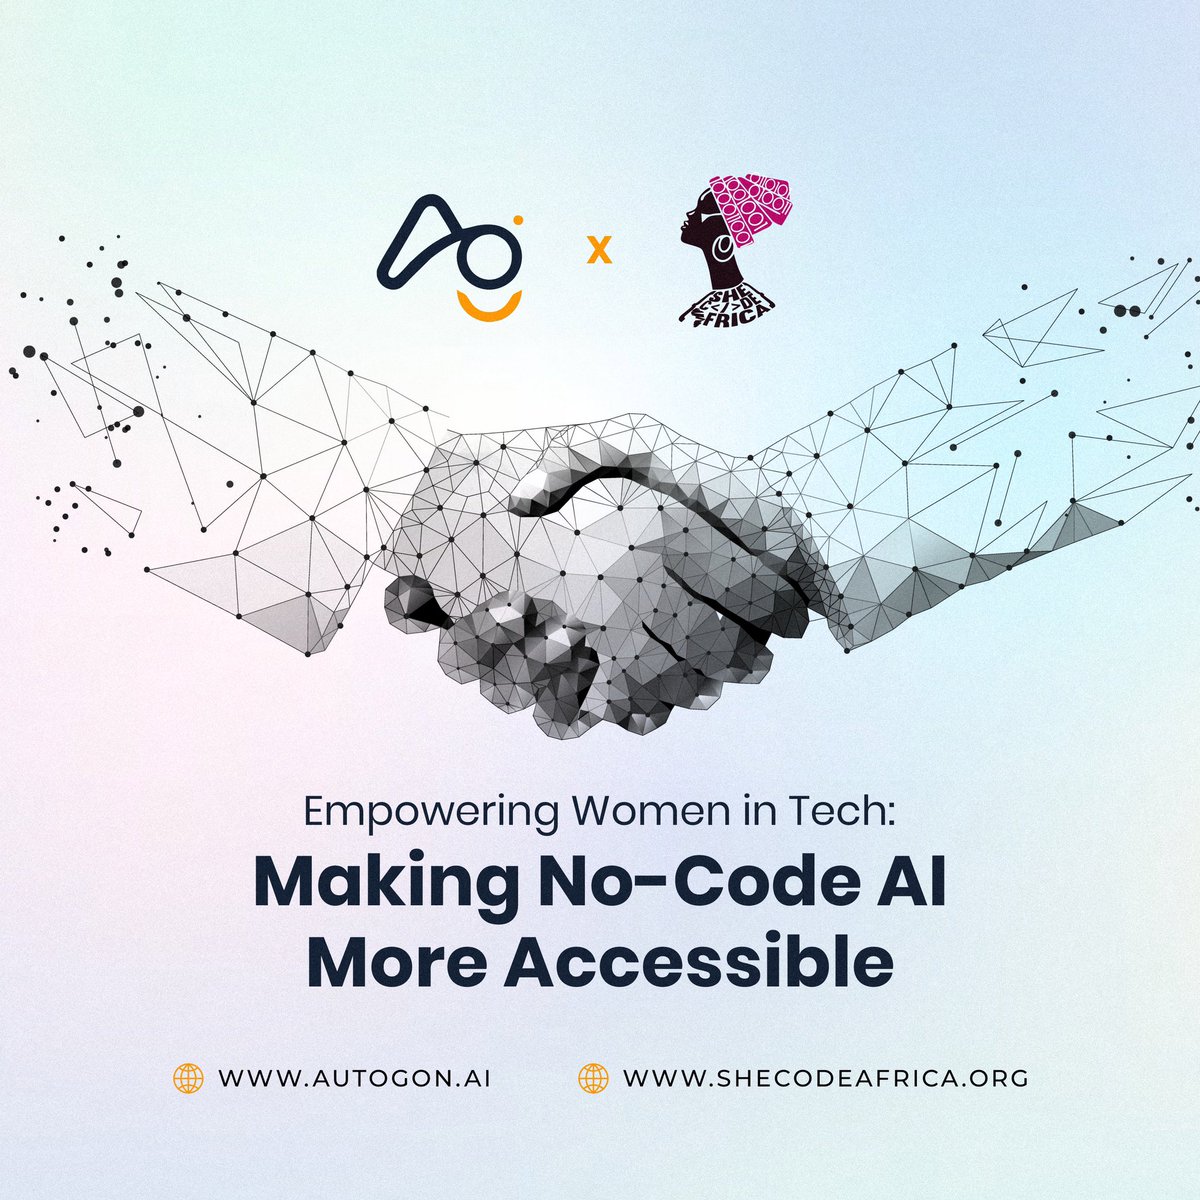 Big News! 🚀🚀

We're excited to announce a new partnership between @Autogon_AI and She Code Africa! 🤝🤝😁

We're joining forces to empower female tech talents across Africa with advanced data analysis capabilities and no-code AI technology. 🚀🚀🚀

Here's what's in store:
-